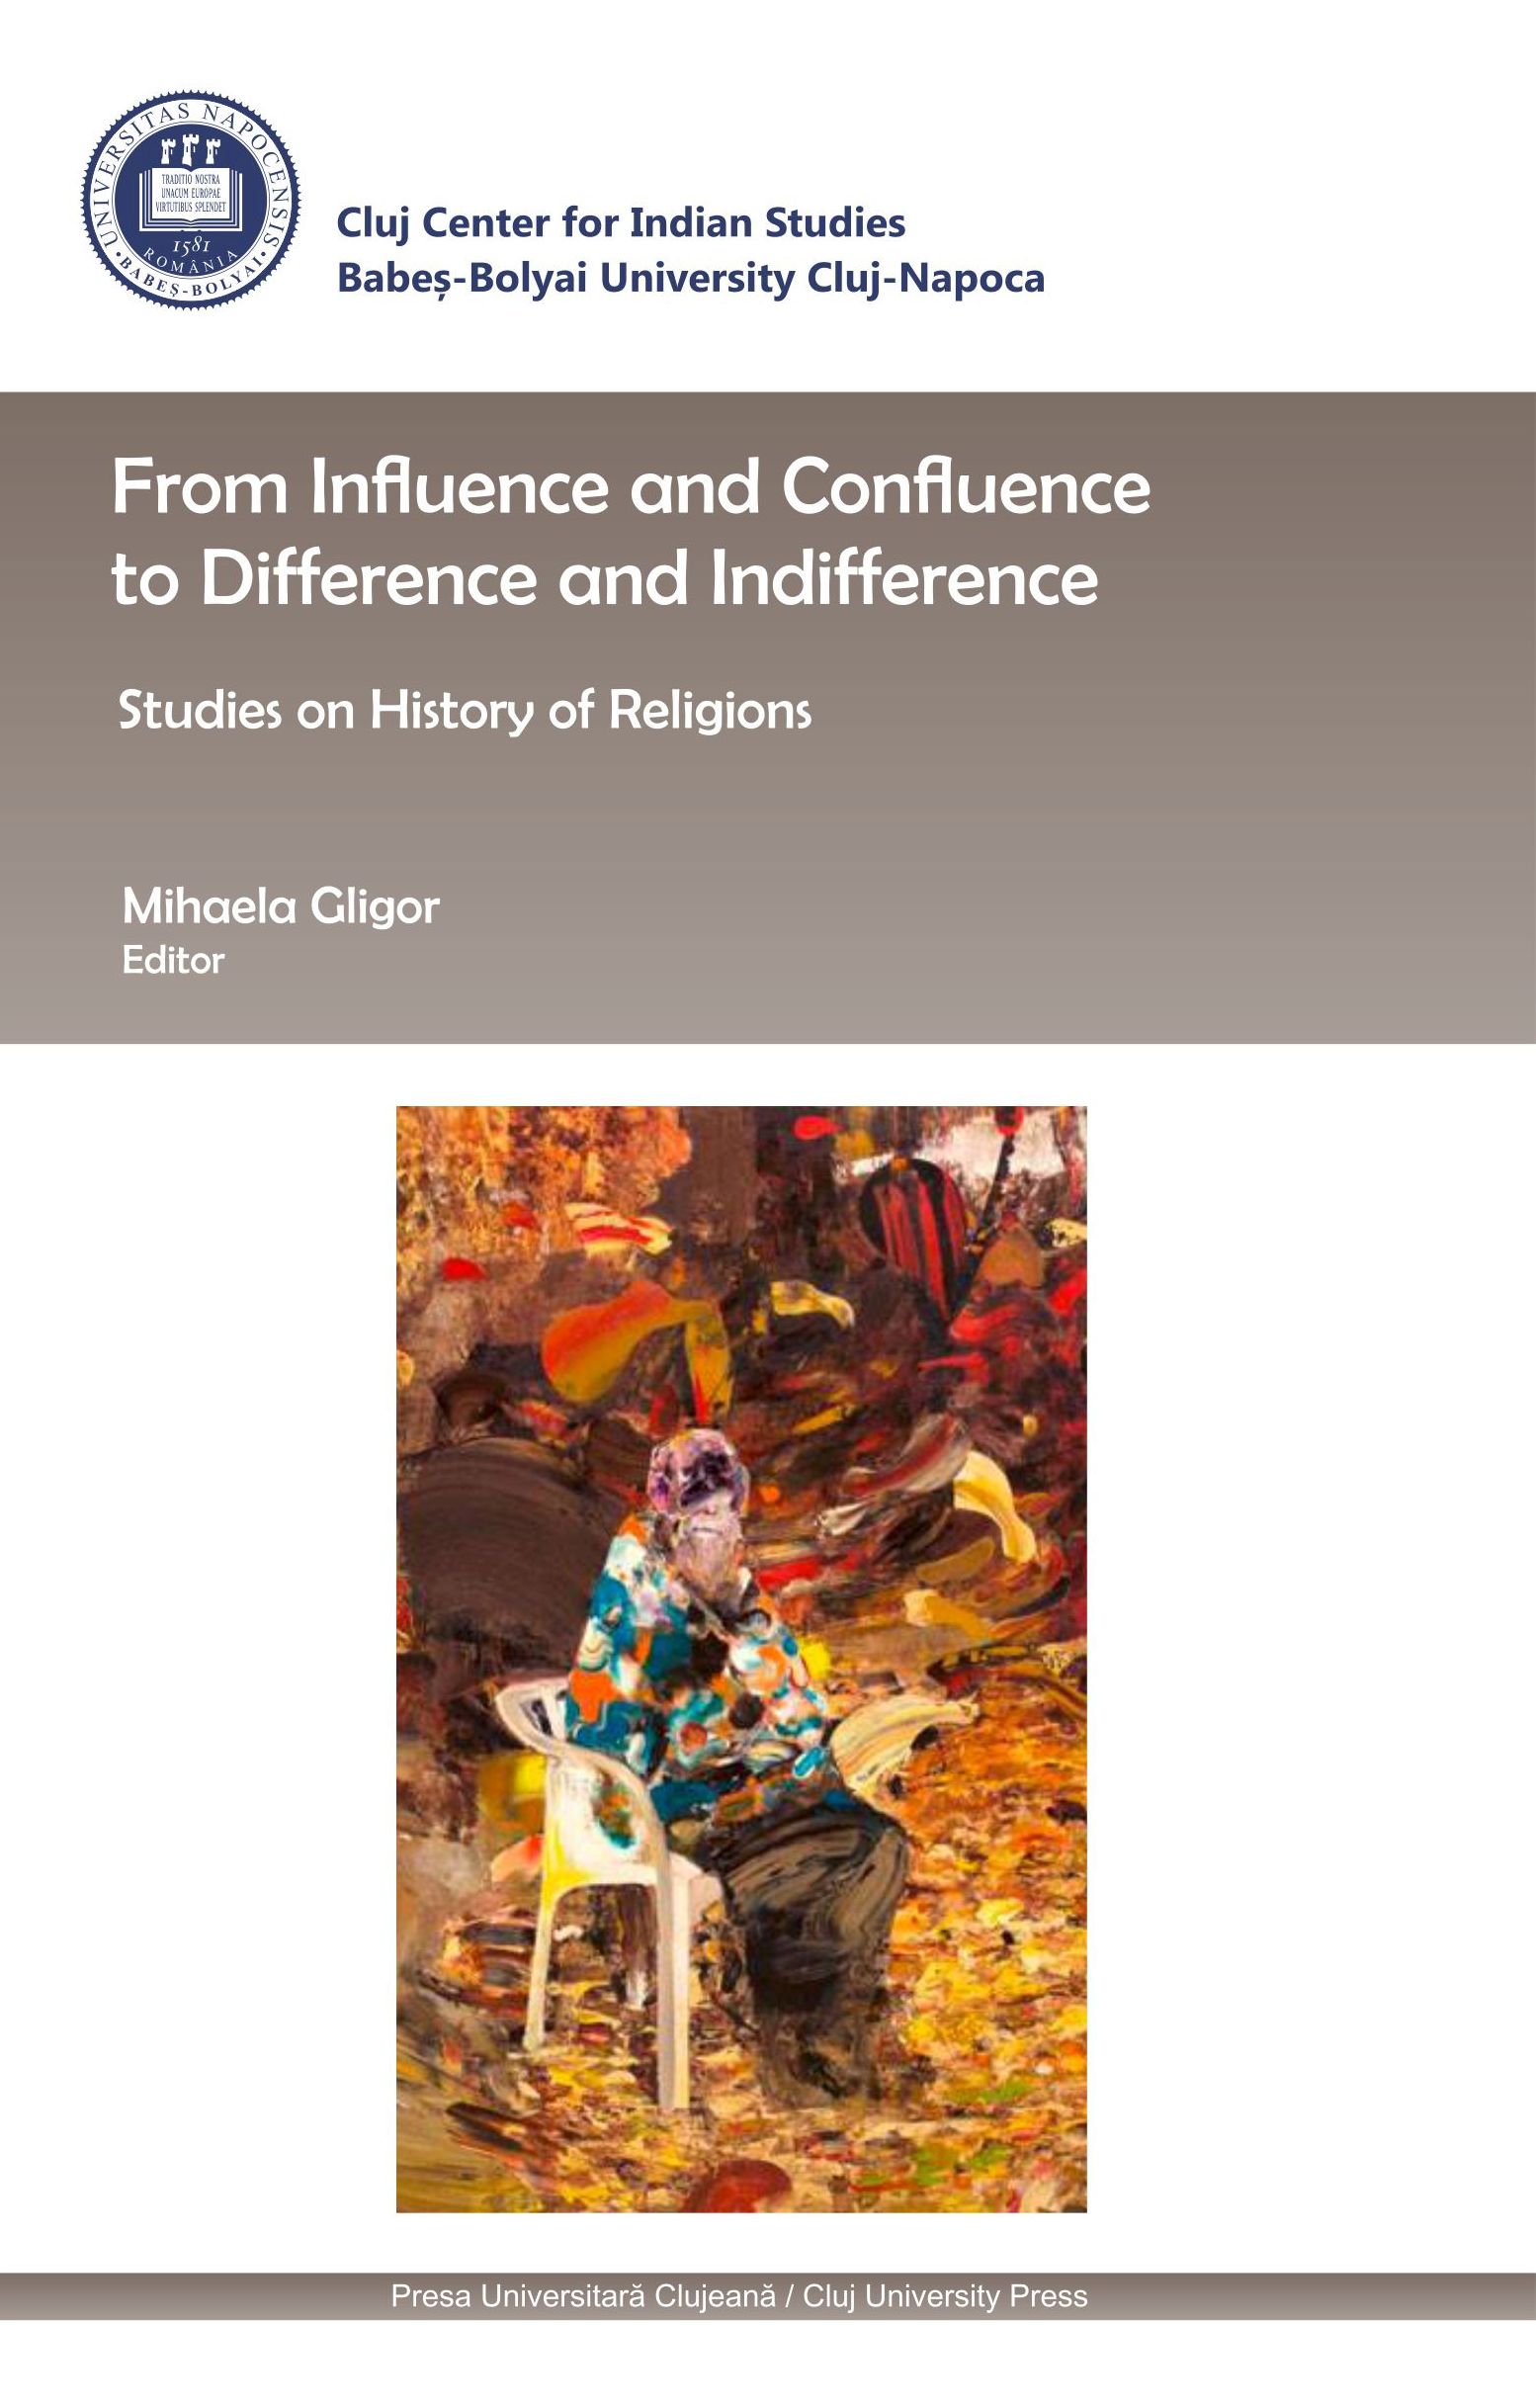 From Influence and Confluence to Difference and Indifference.  Studies on History of Religions. Edited by Mihaela Gligor